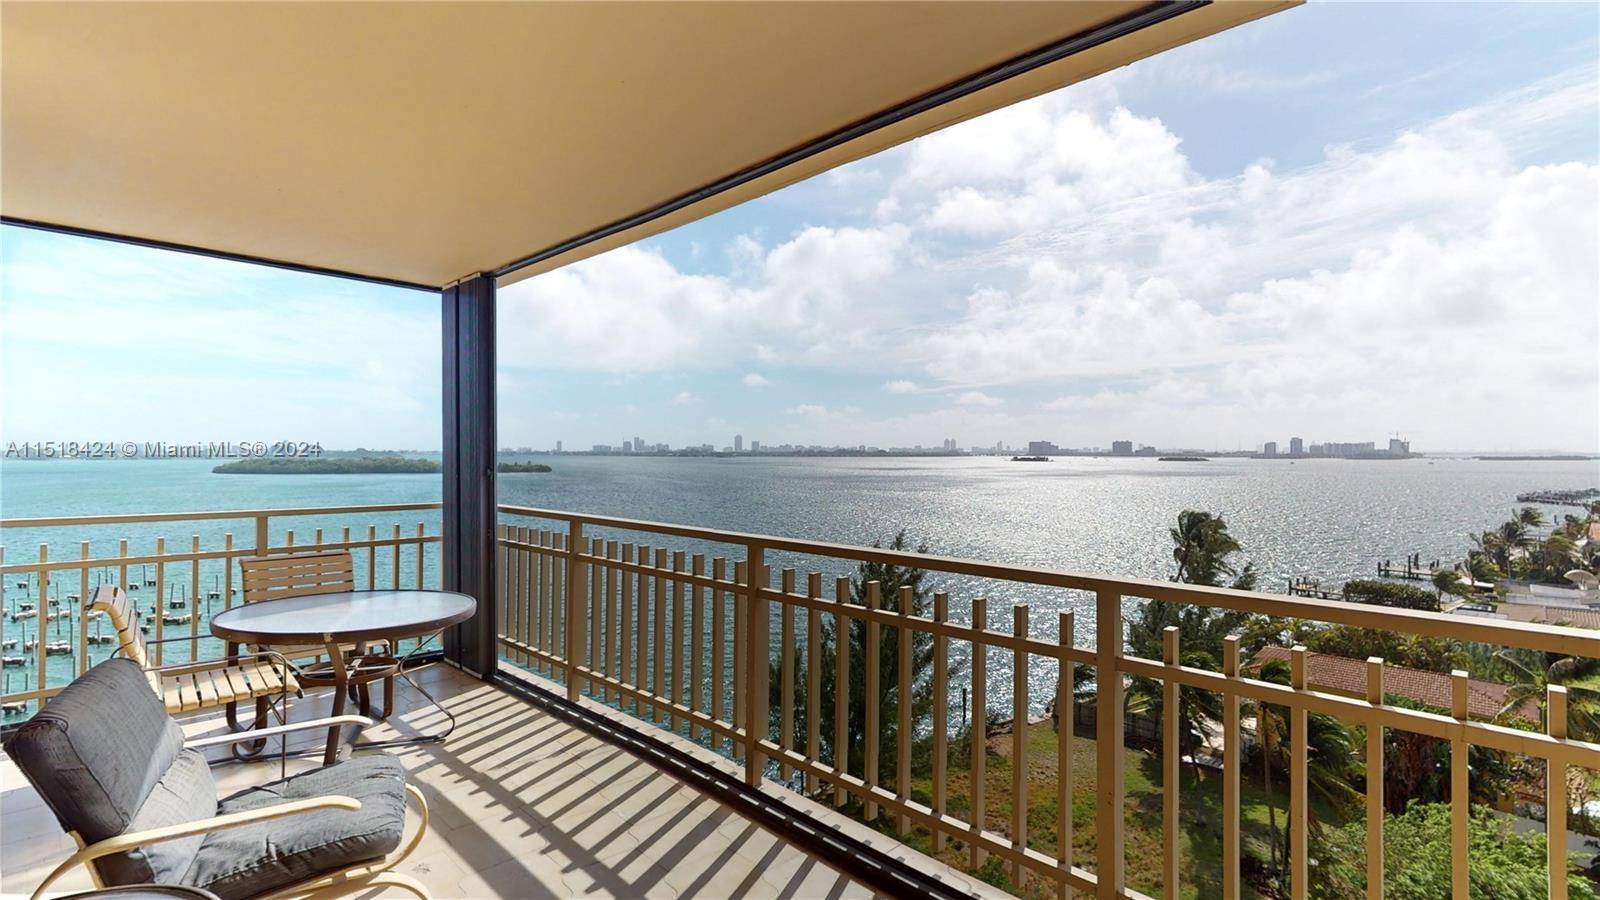 Situated directly on Biscayne Bay, this captivating SE corner unit boasts unparalleled wide bay views and is the most desirable line in the building.